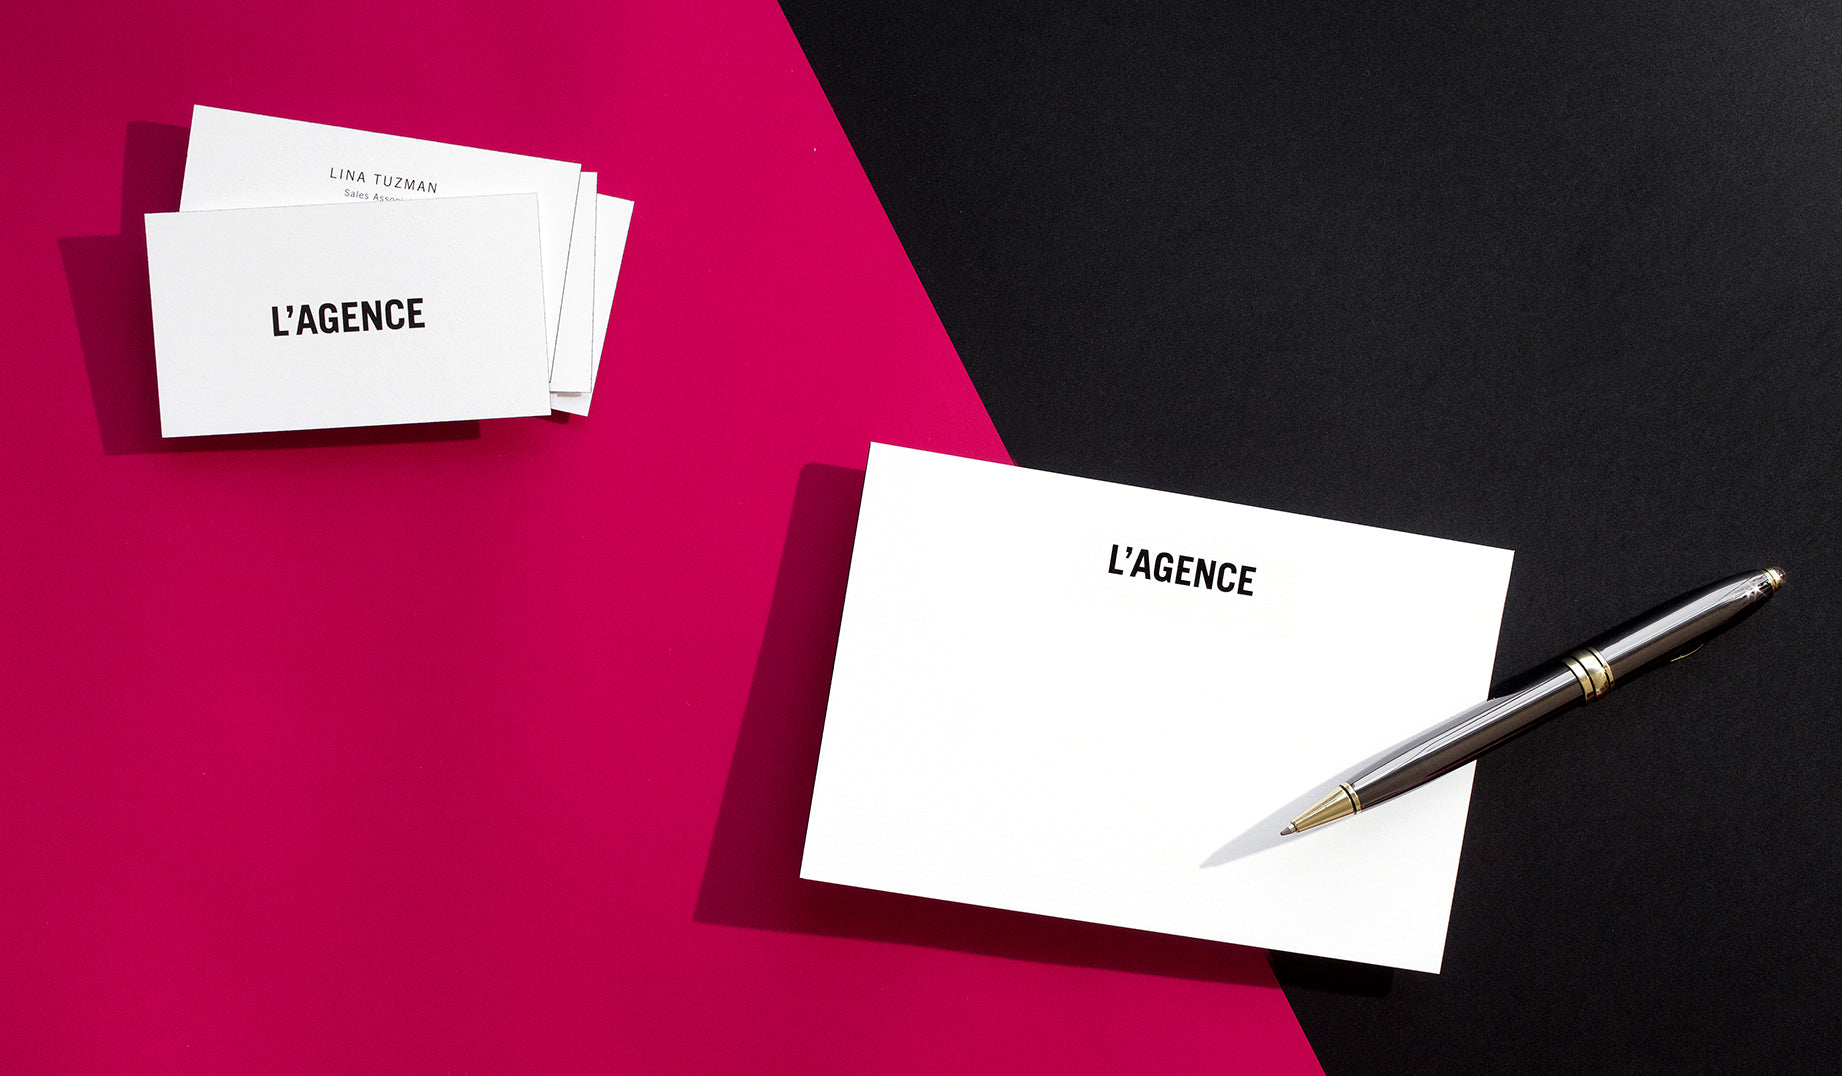 A handwritten note goes a long way, write in style on a personalized card.